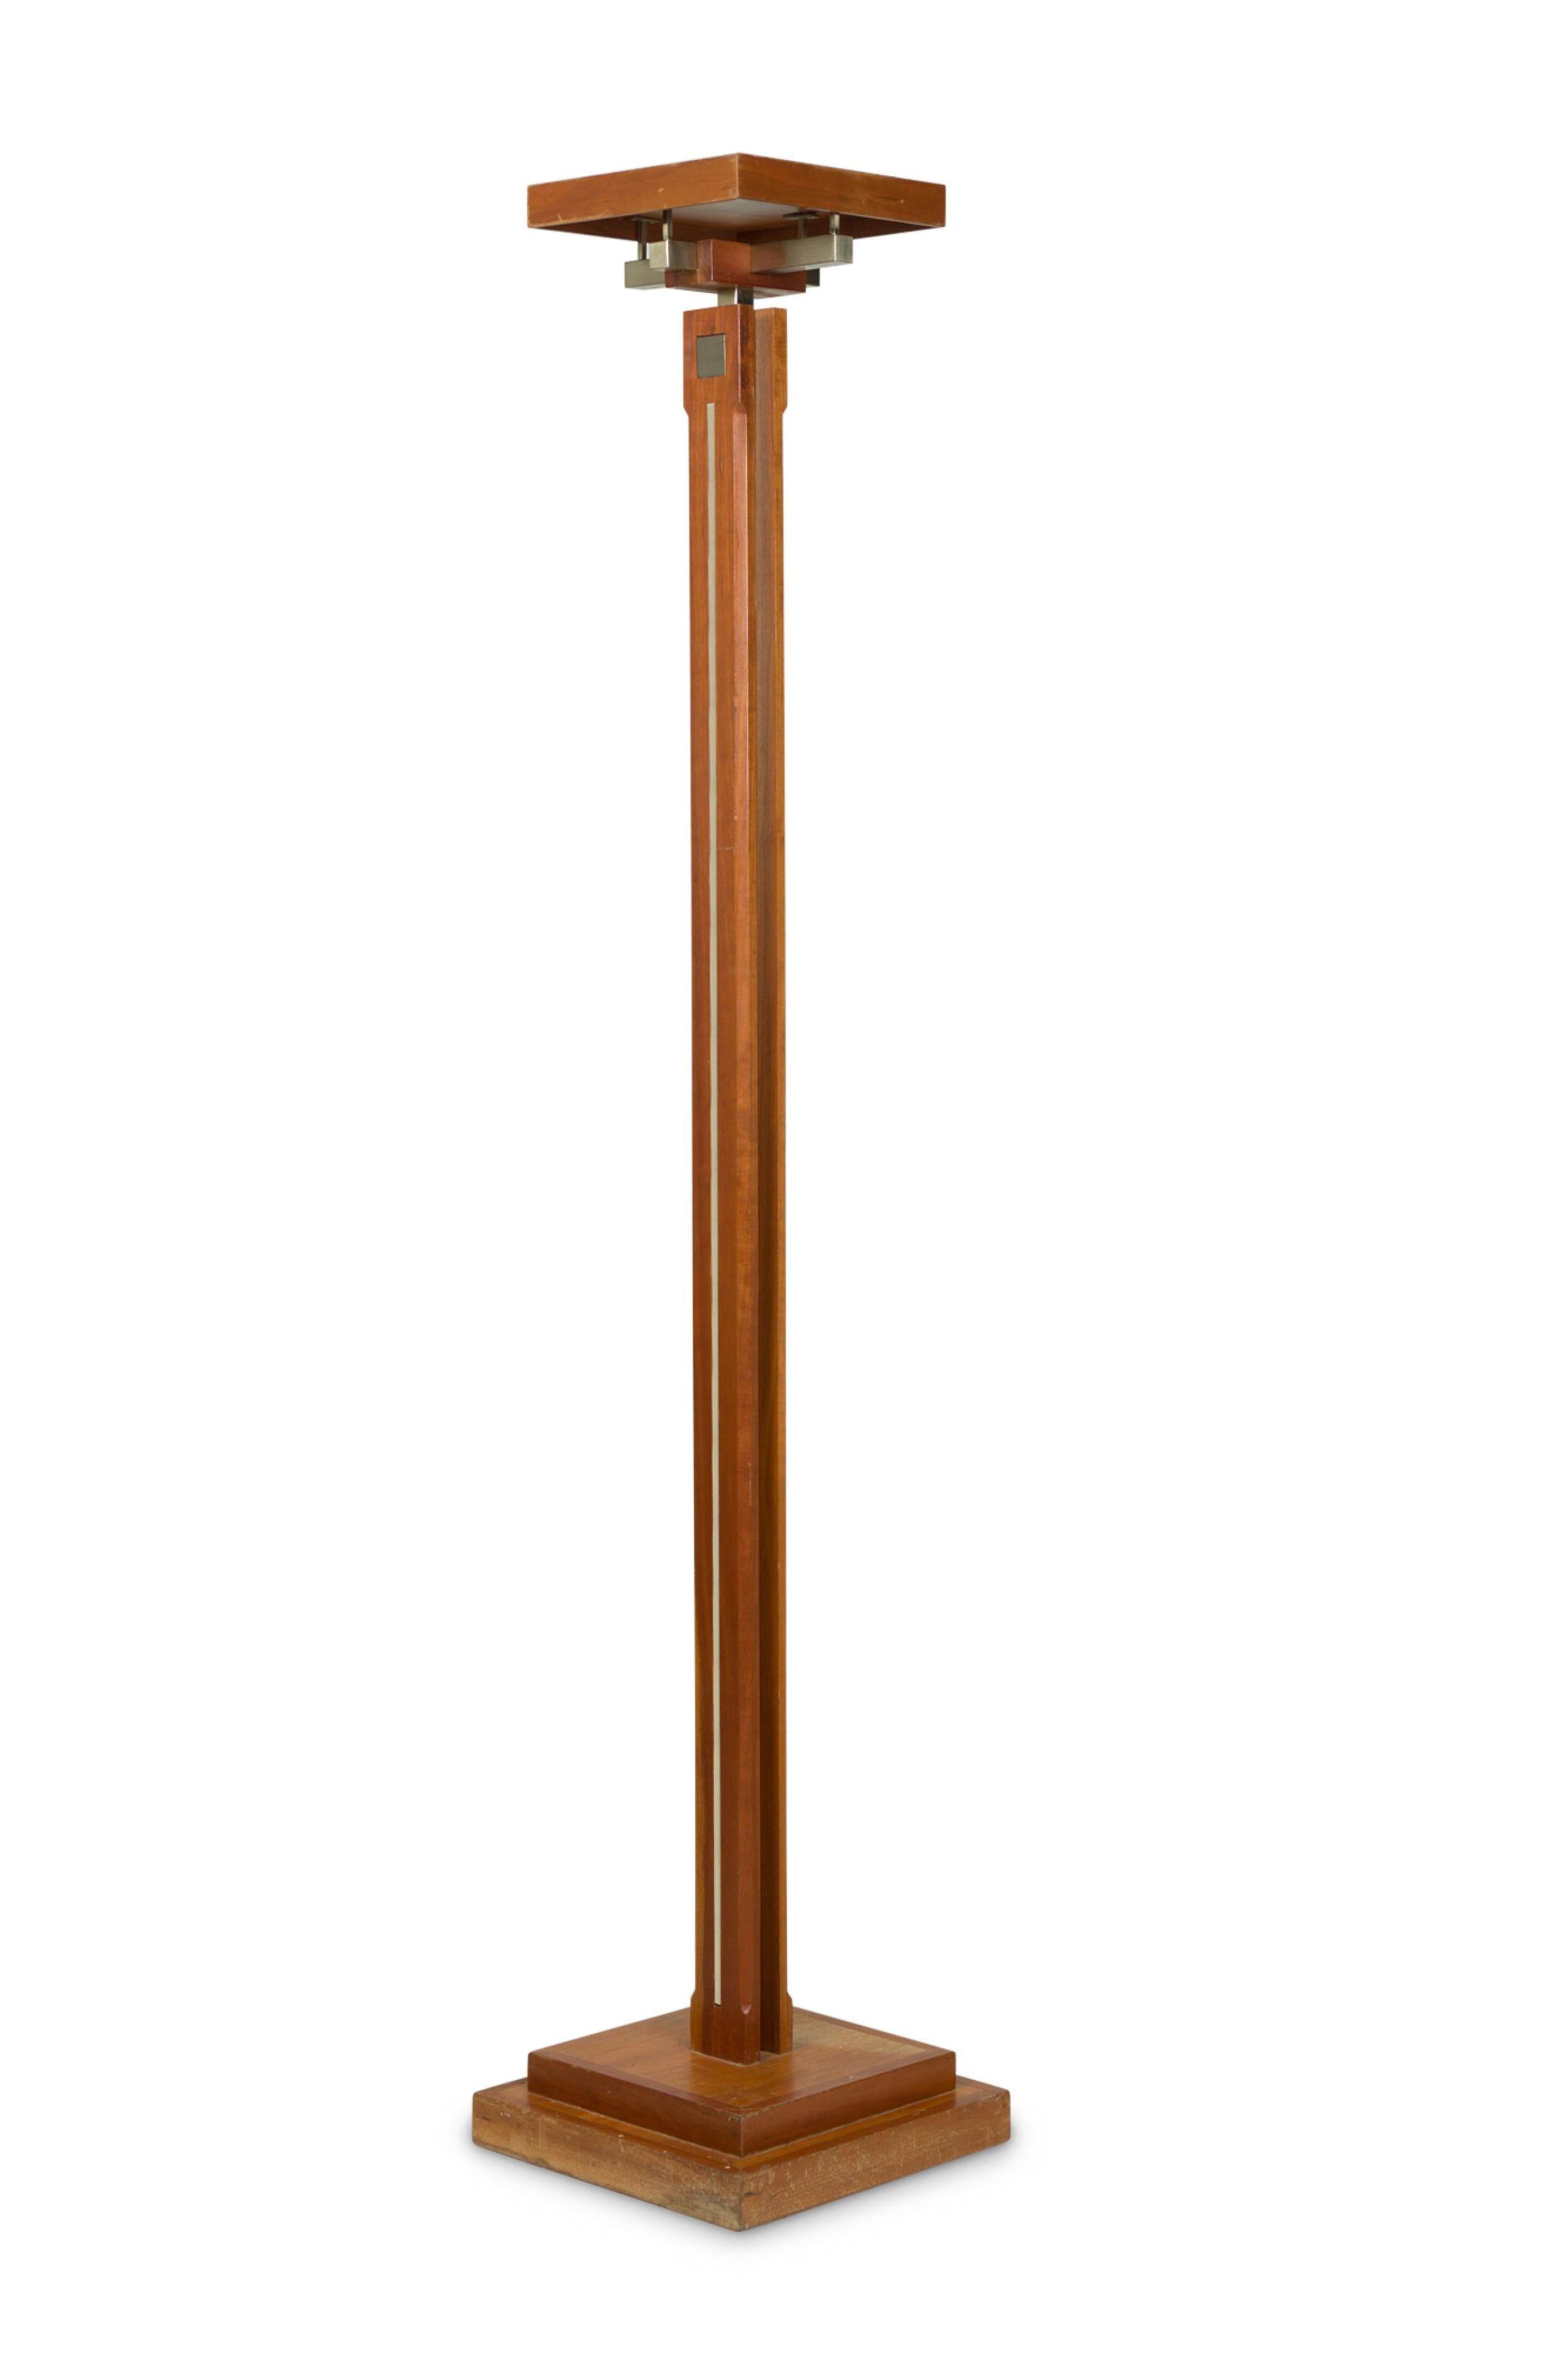 American Mid-Century standing hatrack / coat tree with a wooden central post mounted in a square stepped base. (FRANK LLOYD WRIGHT, TALIESEN)
 

 Minor wear
